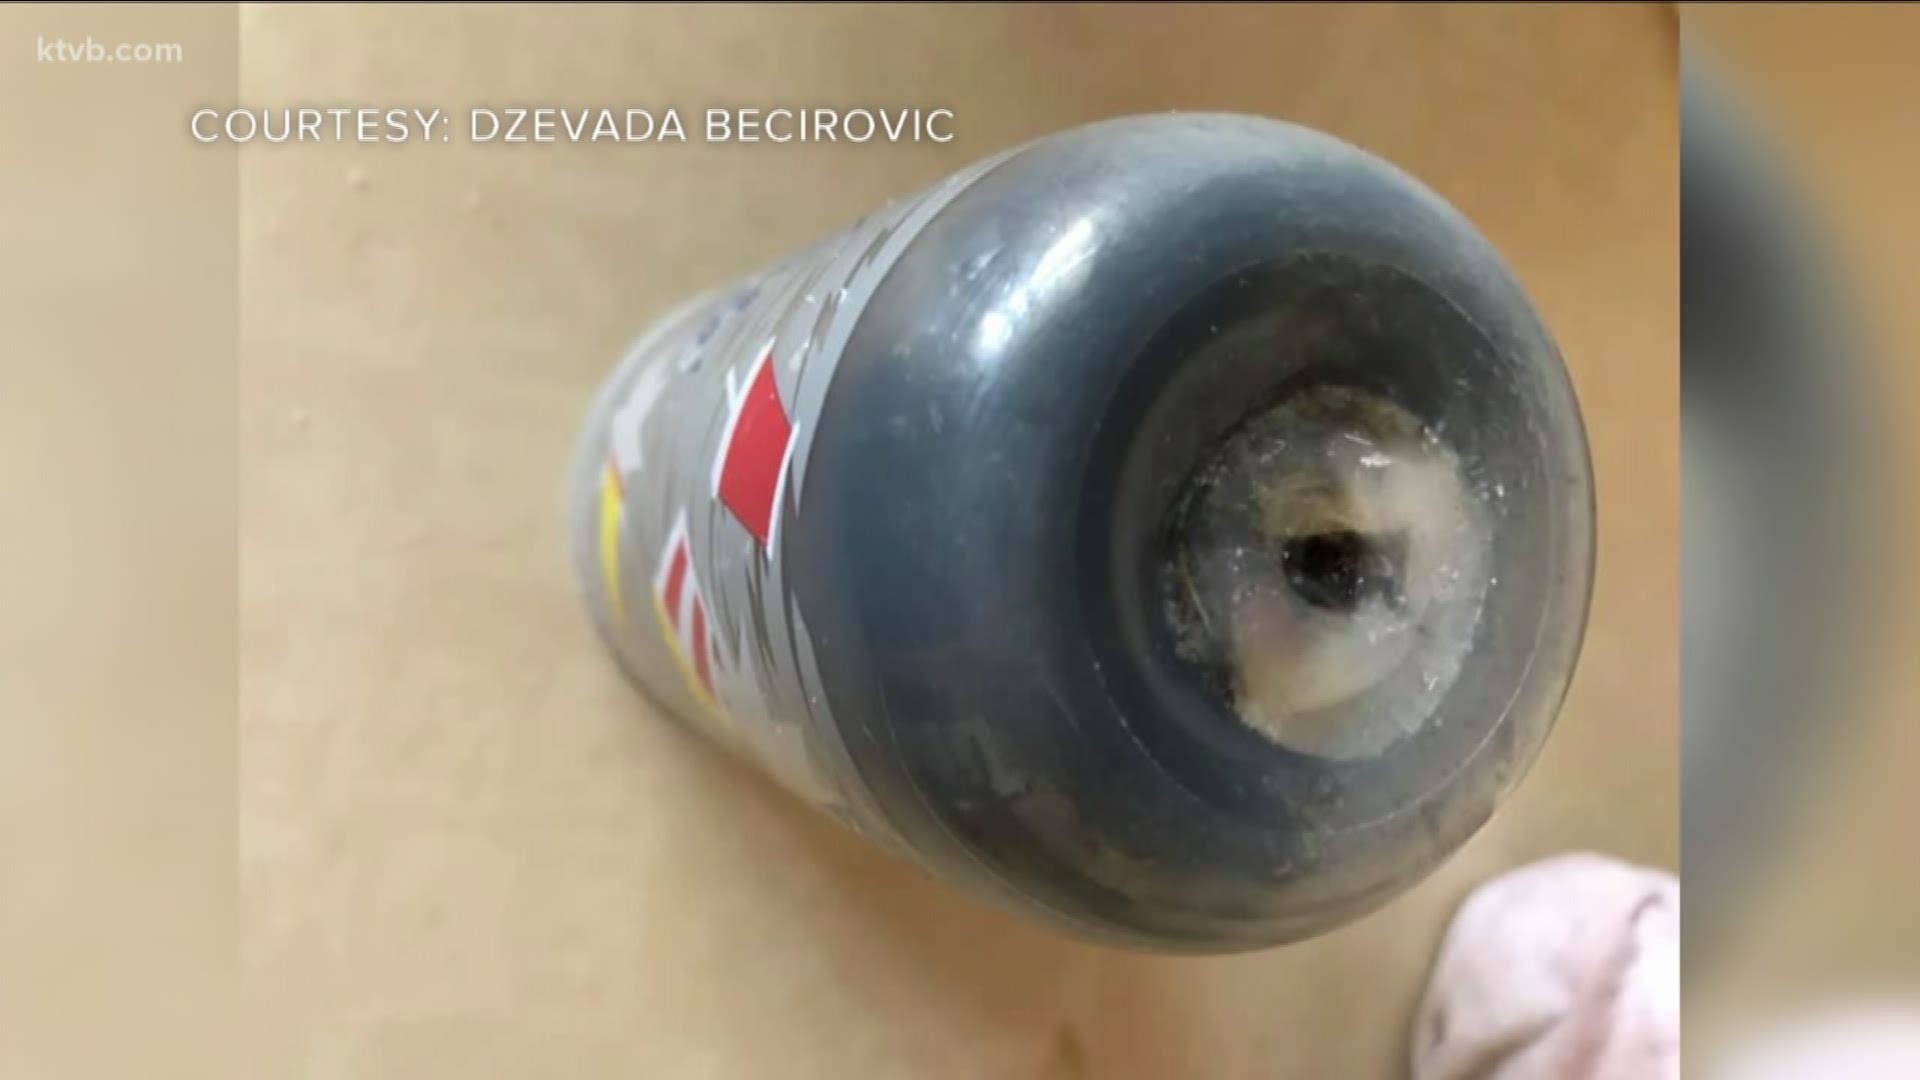 Dzevada Becirovic just poured milk into her son's insulated light-up sippy cup last week when she says it exploded in her face, injuring her face, hand and lungs.